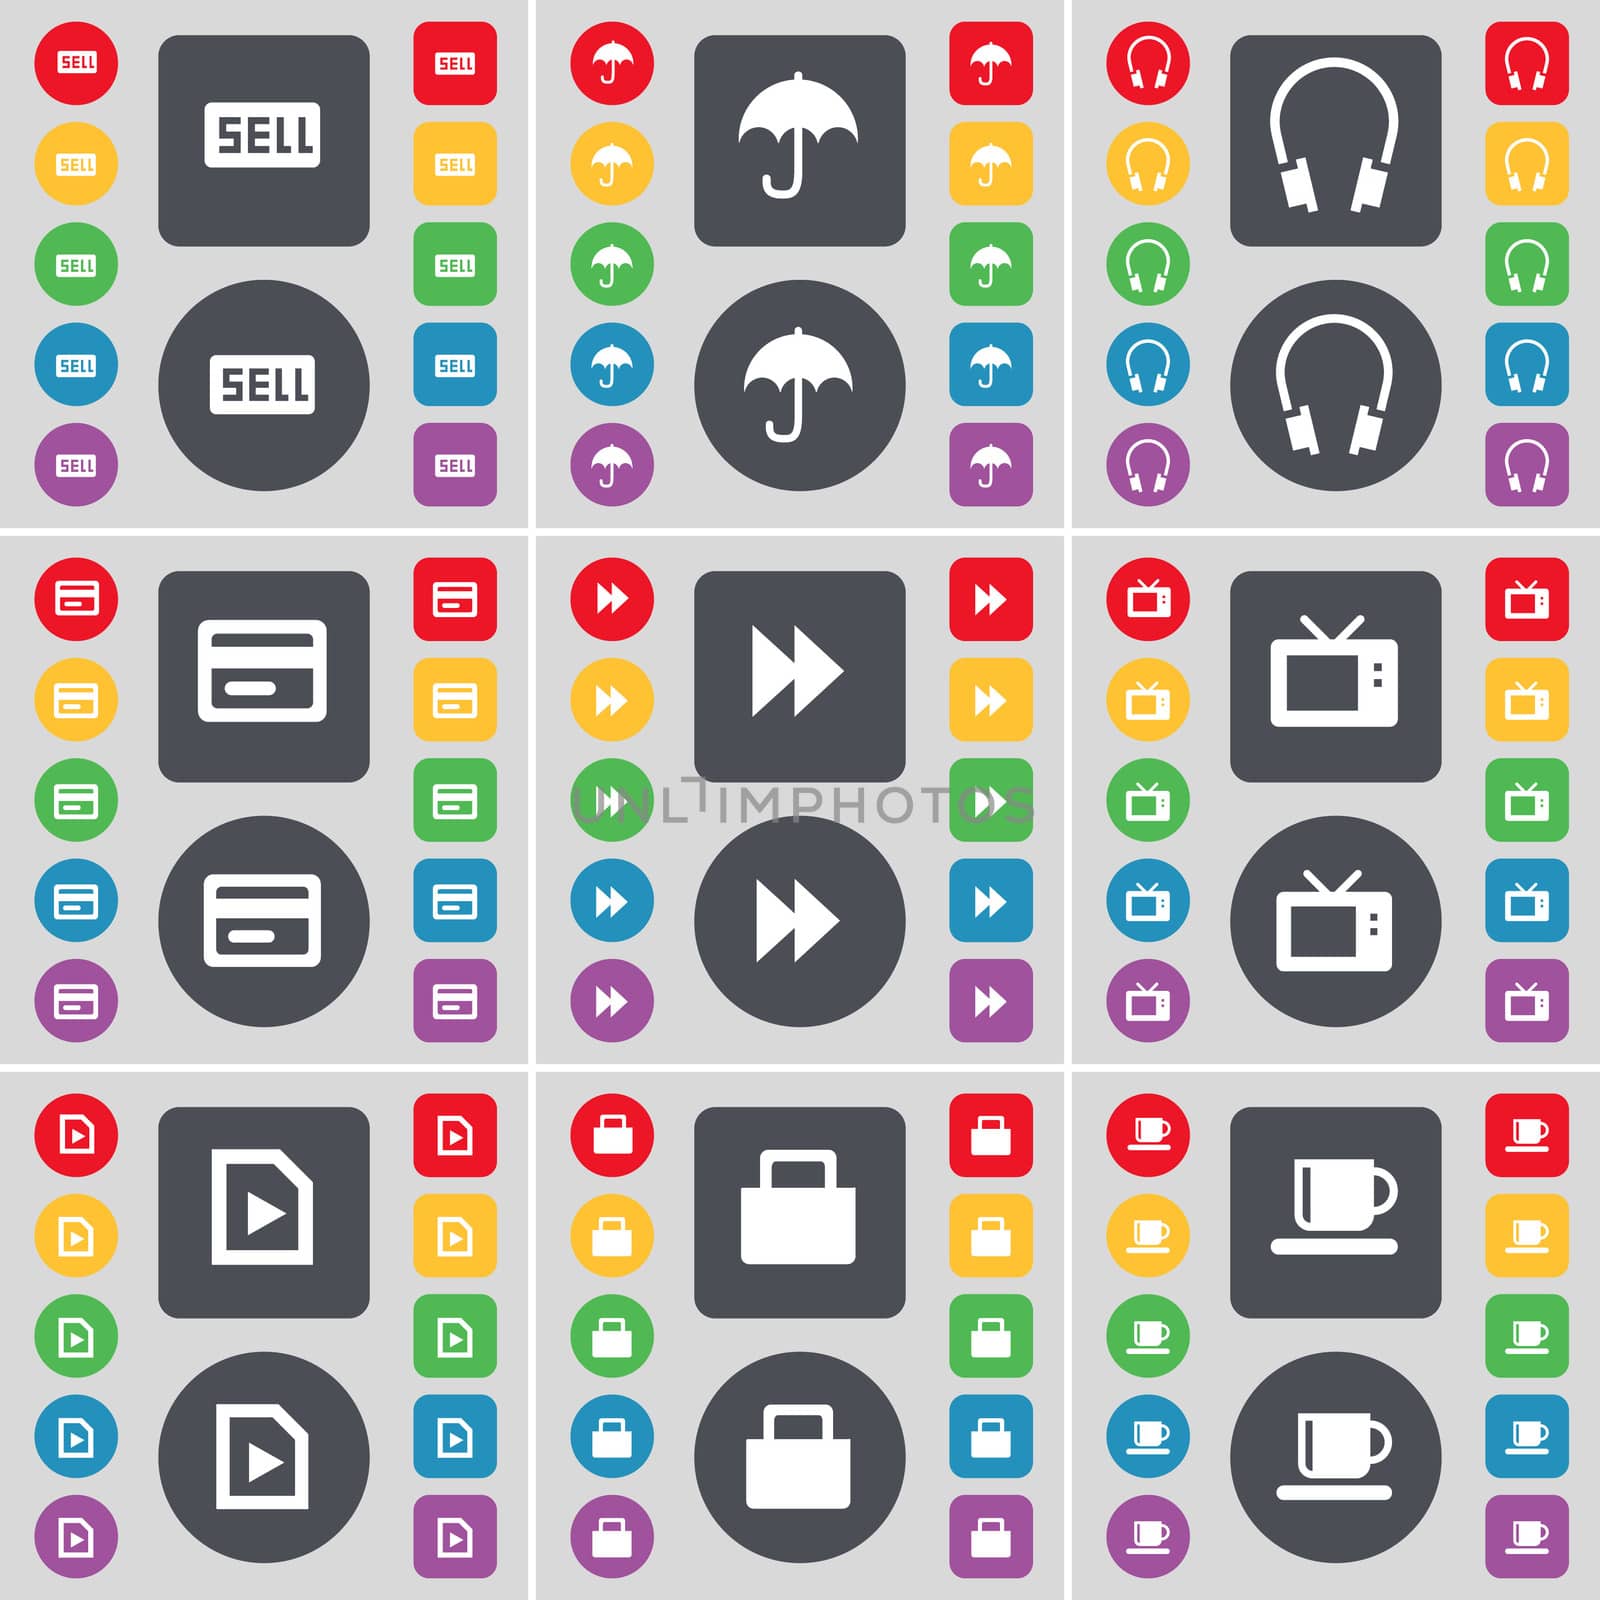 Sell, Umbrella, Headphones, Credit card, Rewind, Retro phone, Media file, Lock, Cup icon symbol. A large set of flat, colored buttons for your design. illustration